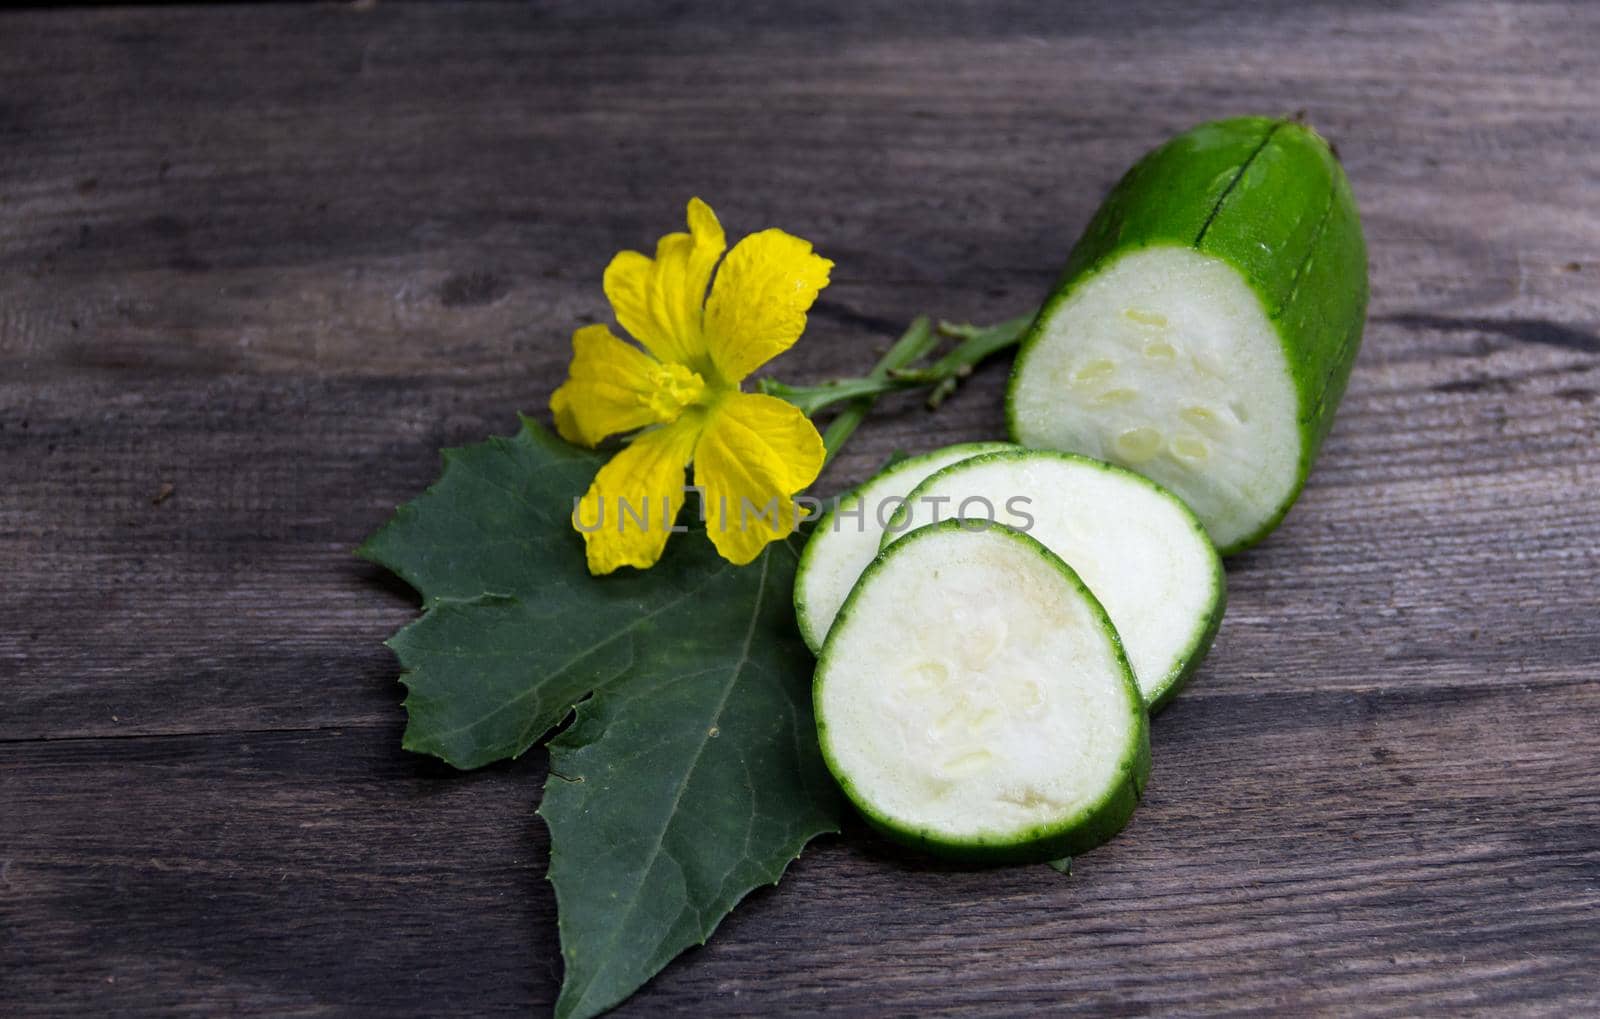 fruit and flower of the green luffa that is used for Asian cuisine, on rustic wooden background